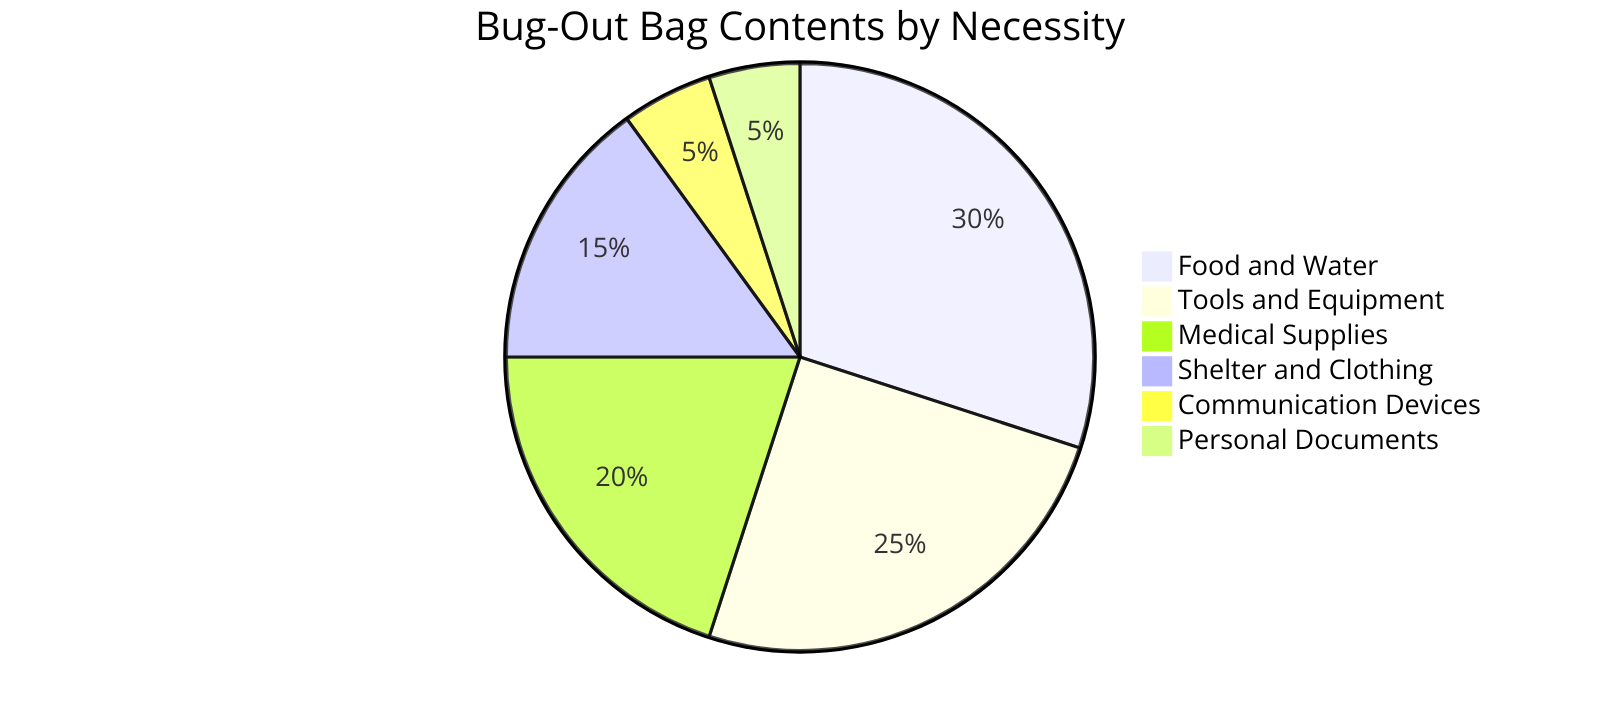 the contents of a bug-out bag, categorized by necessity